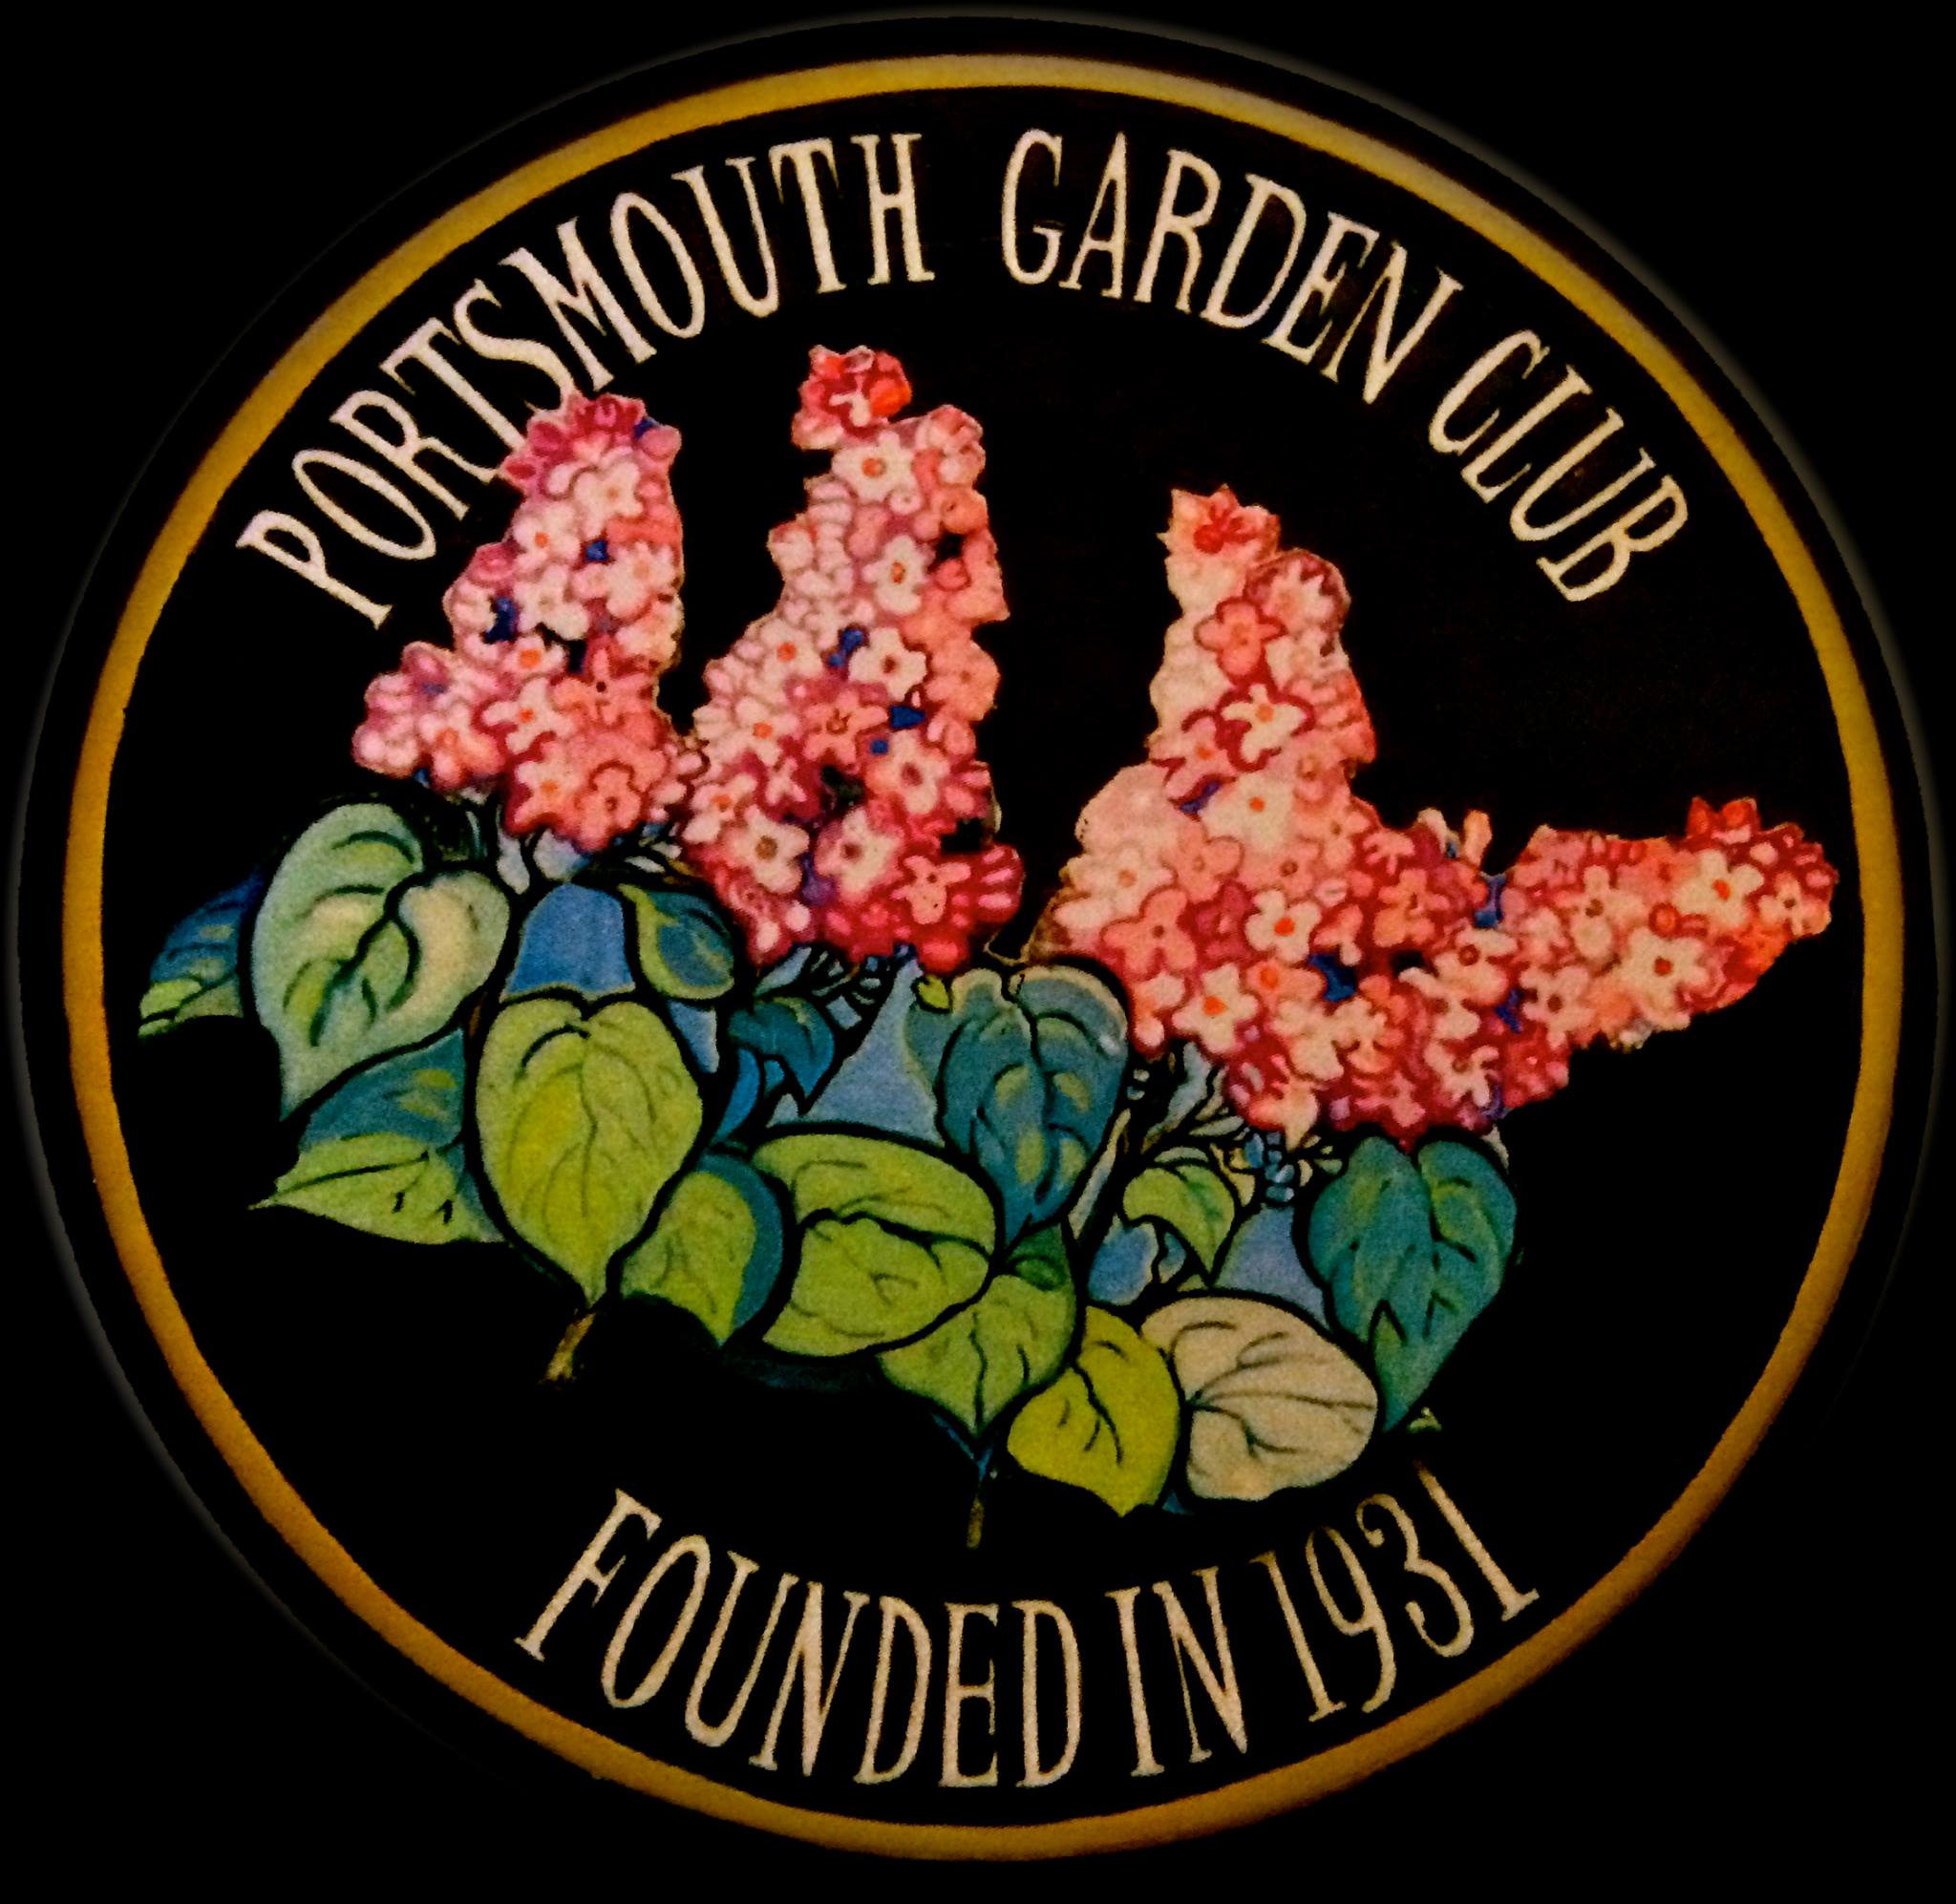 Portsmouth Garden Club Founded in 1931